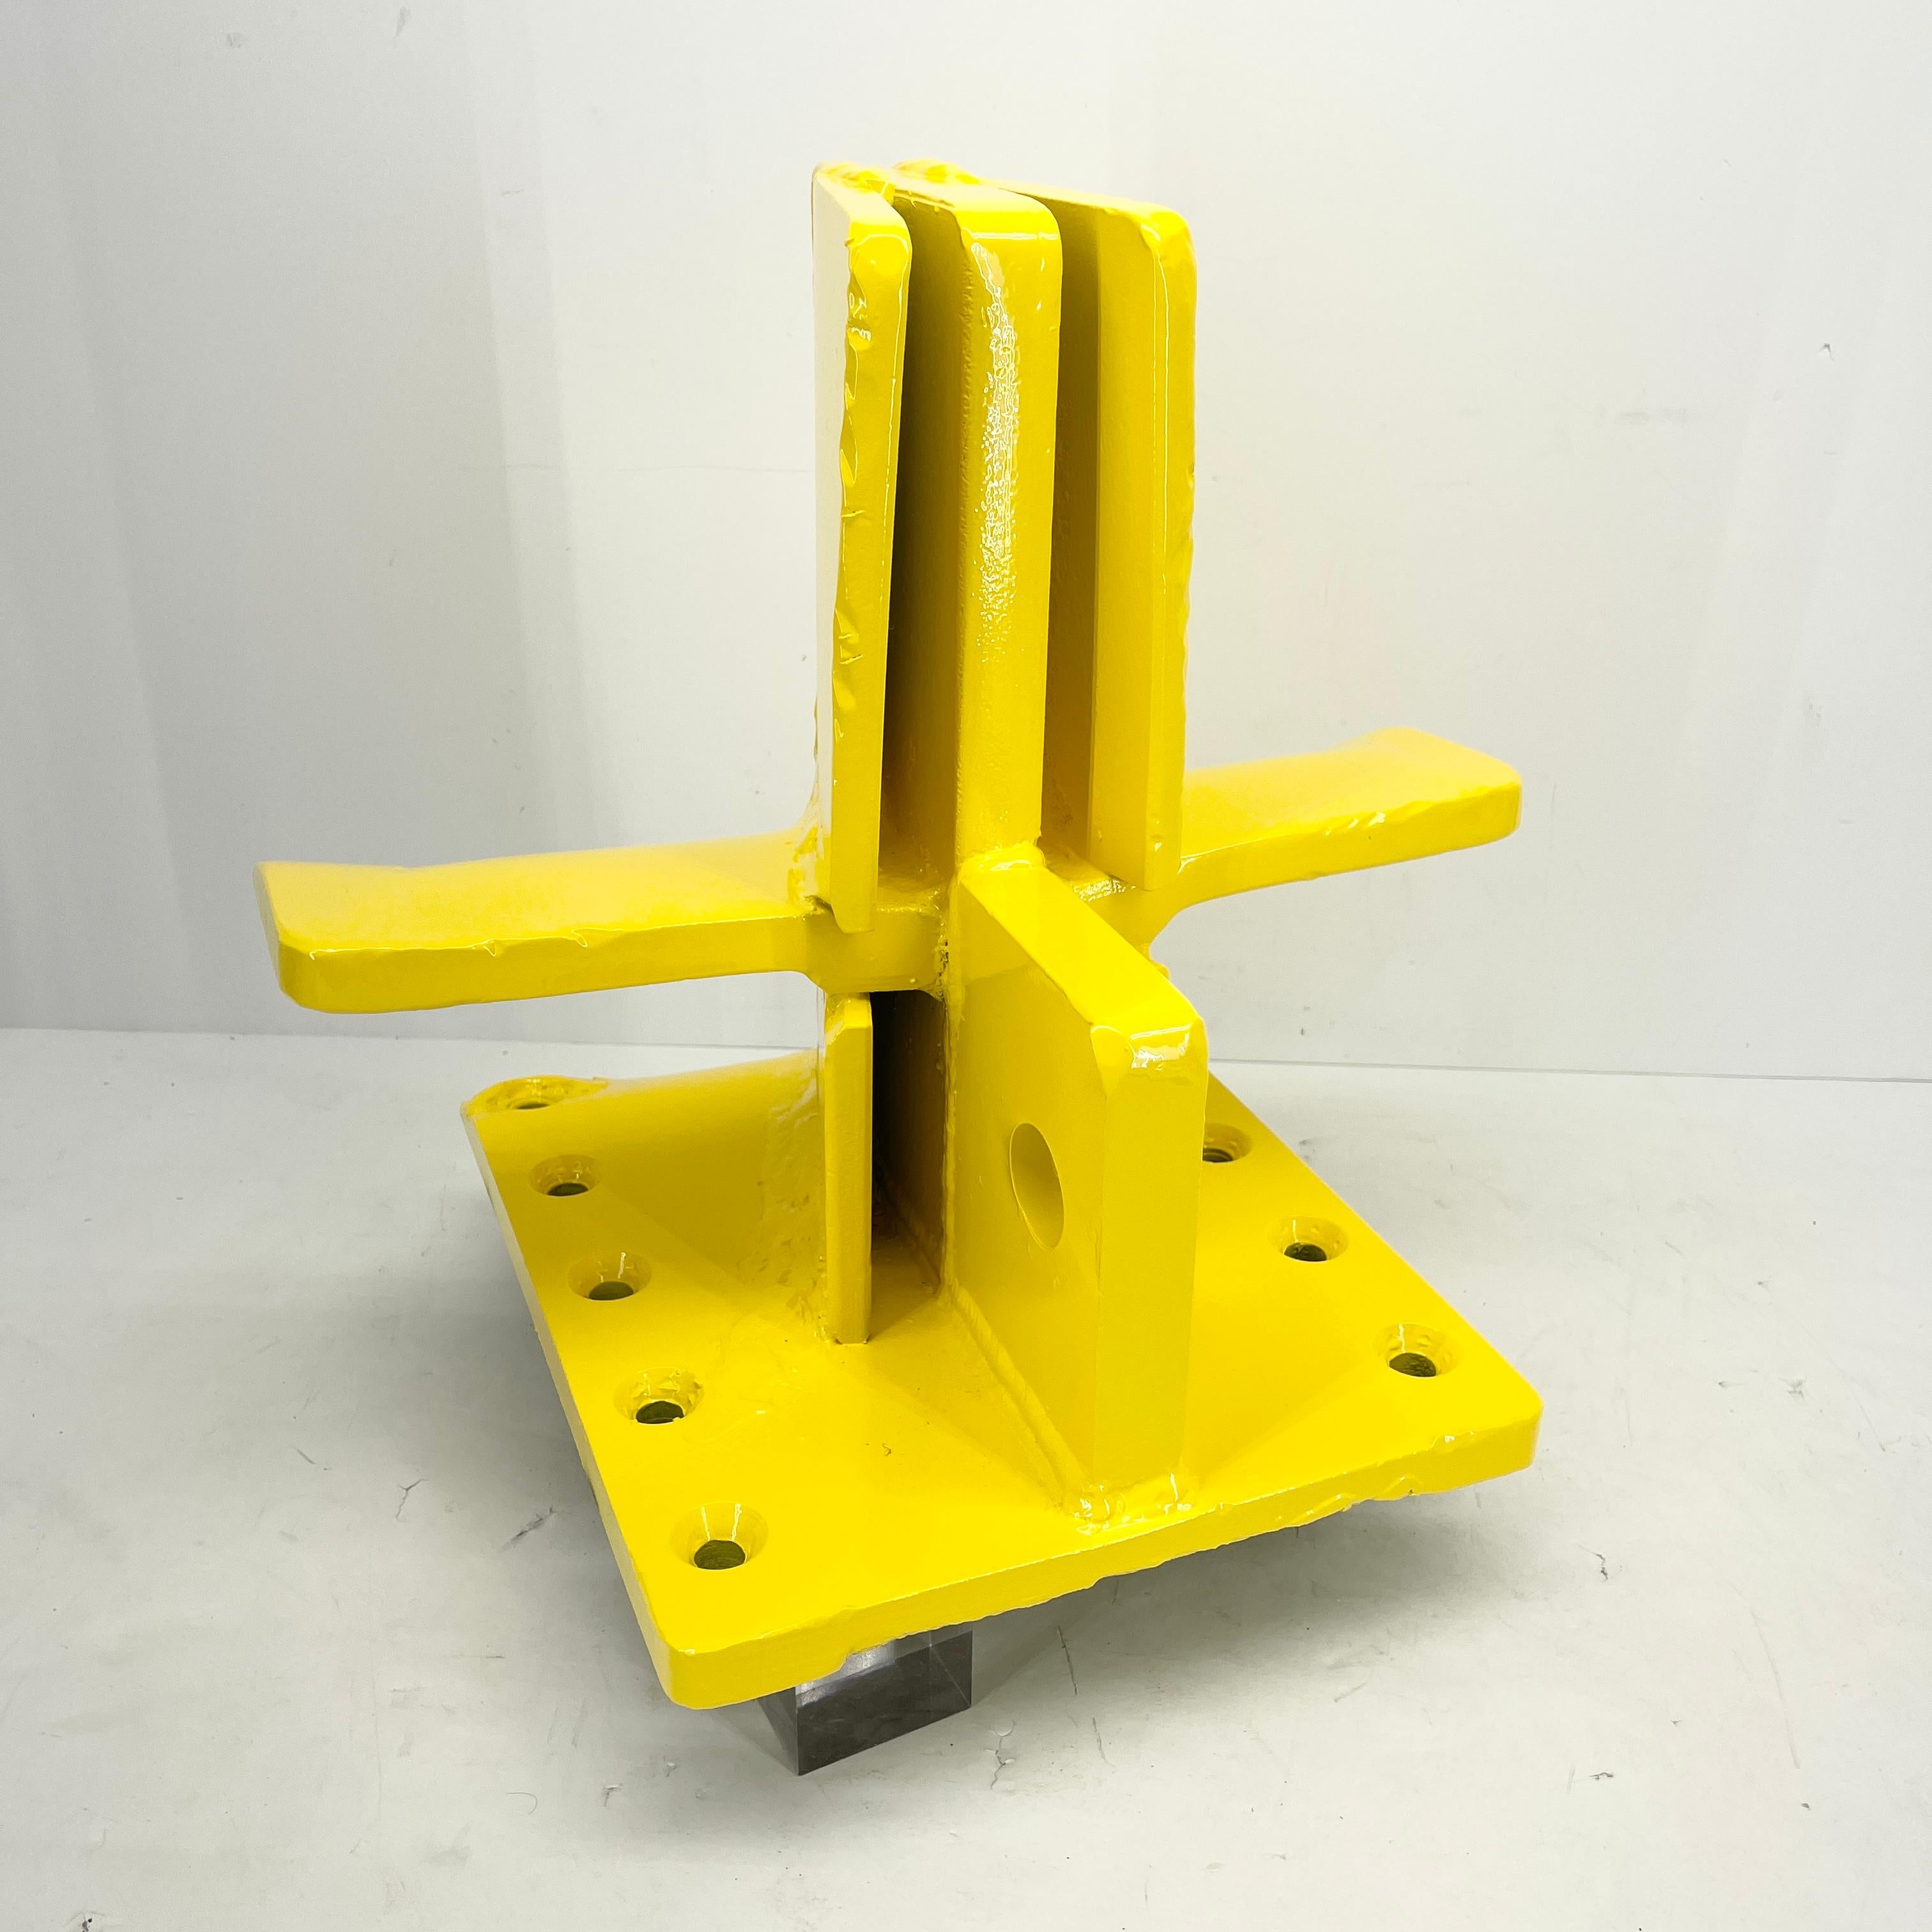 Bright Sunshine Yellow Abstract Eagle Head Sculpture From a 3 Way Wood Splitter For Sale 9